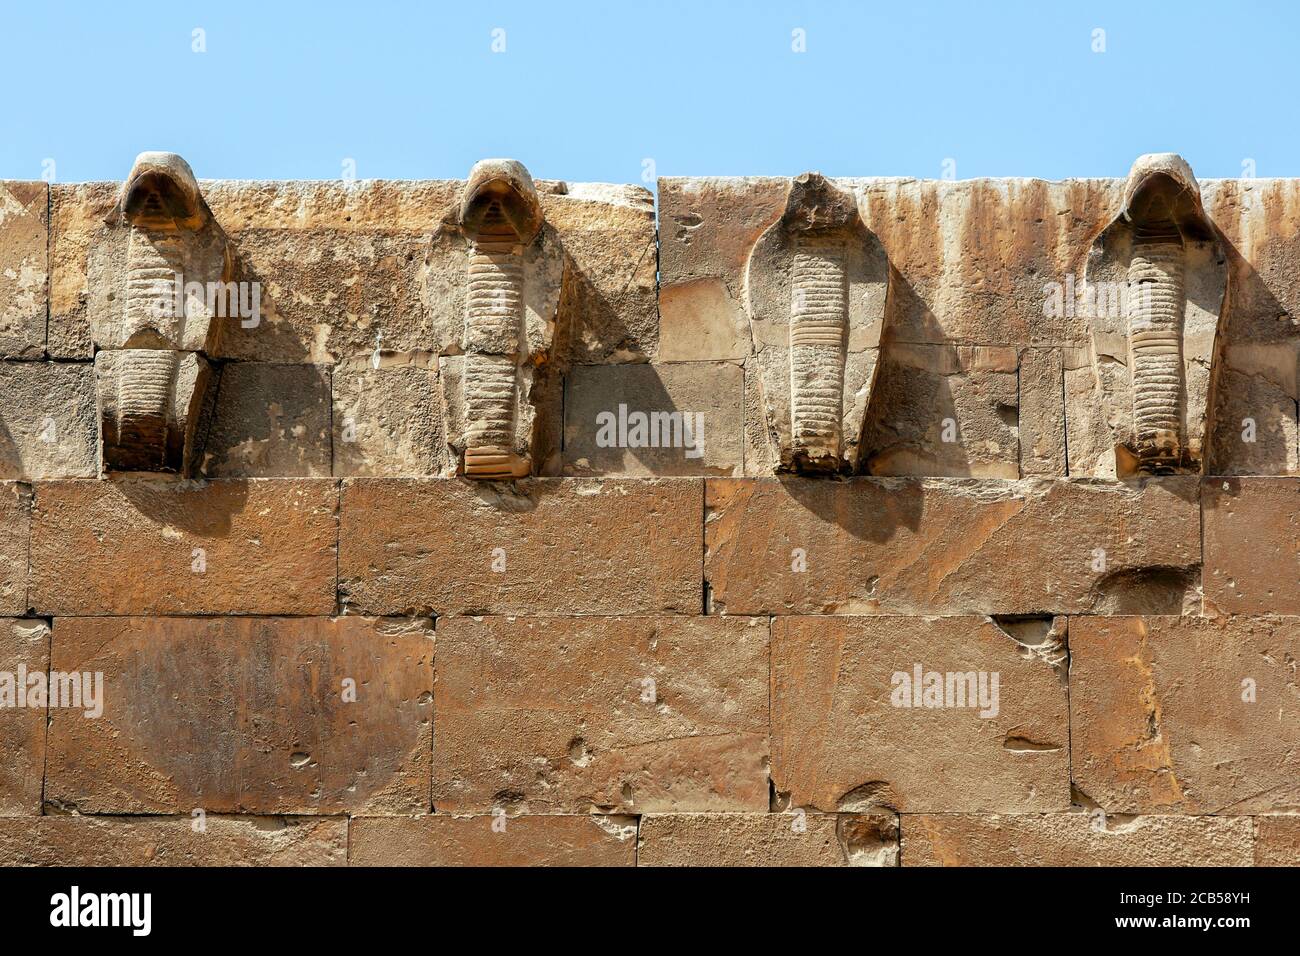 Stone carved cobra figures adorn the eastern wall of the Saqqara Necropolis in northern Egypt. Stock Photo